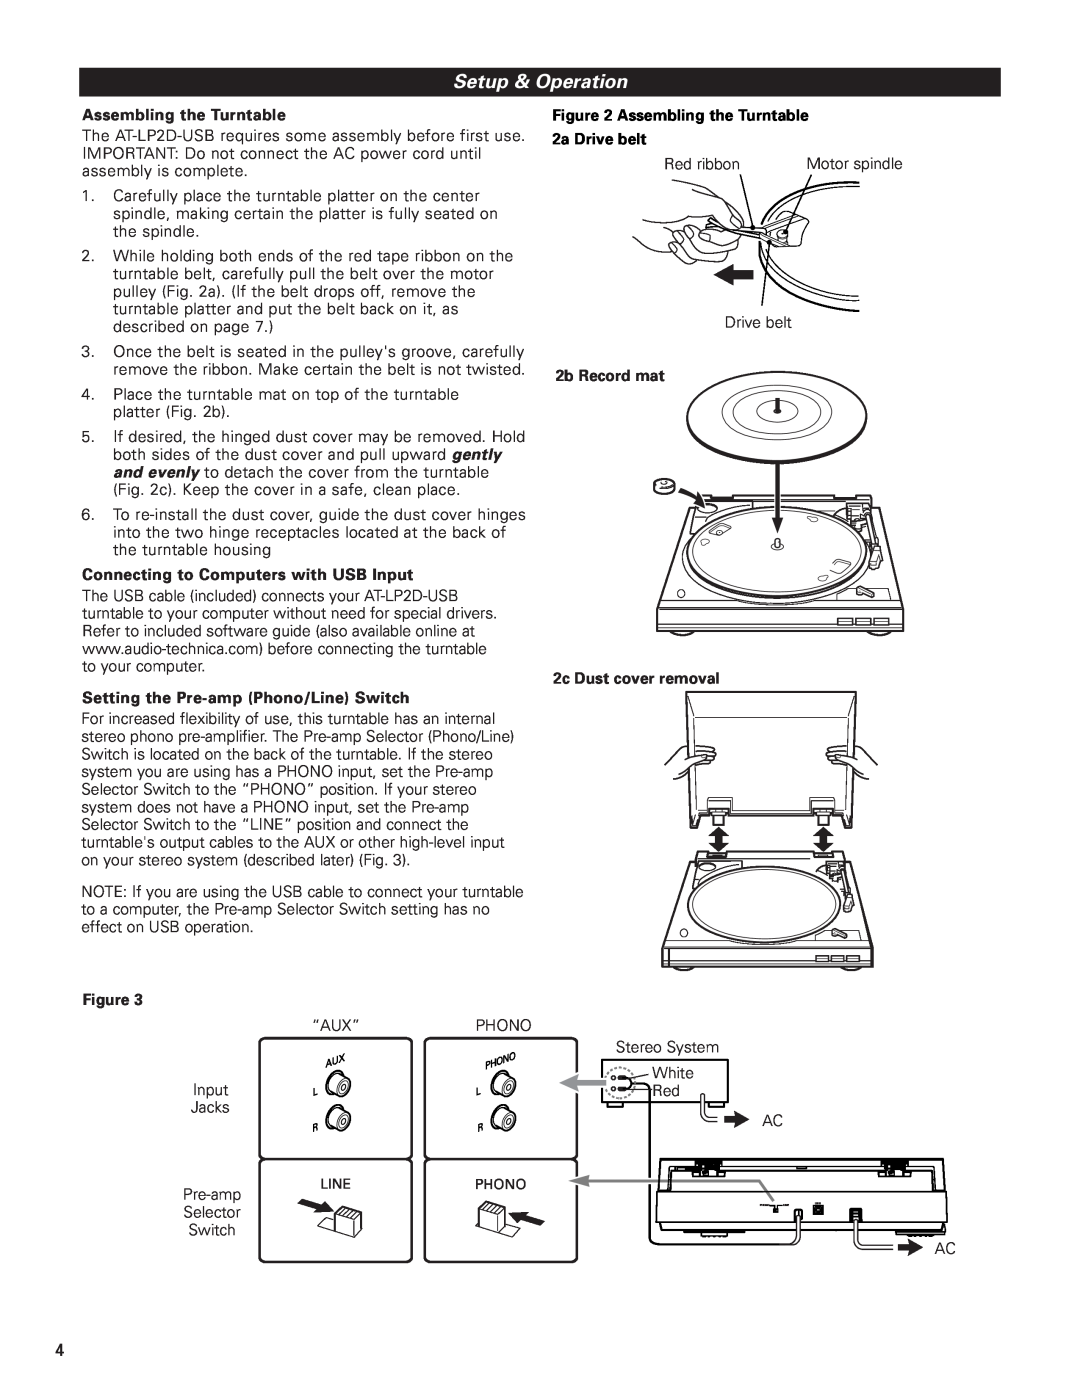 Audio-Technica AT-LP2D-USB manual Setup & Operation, Assembling the Turntable, Connecting to Computers with USB Input 